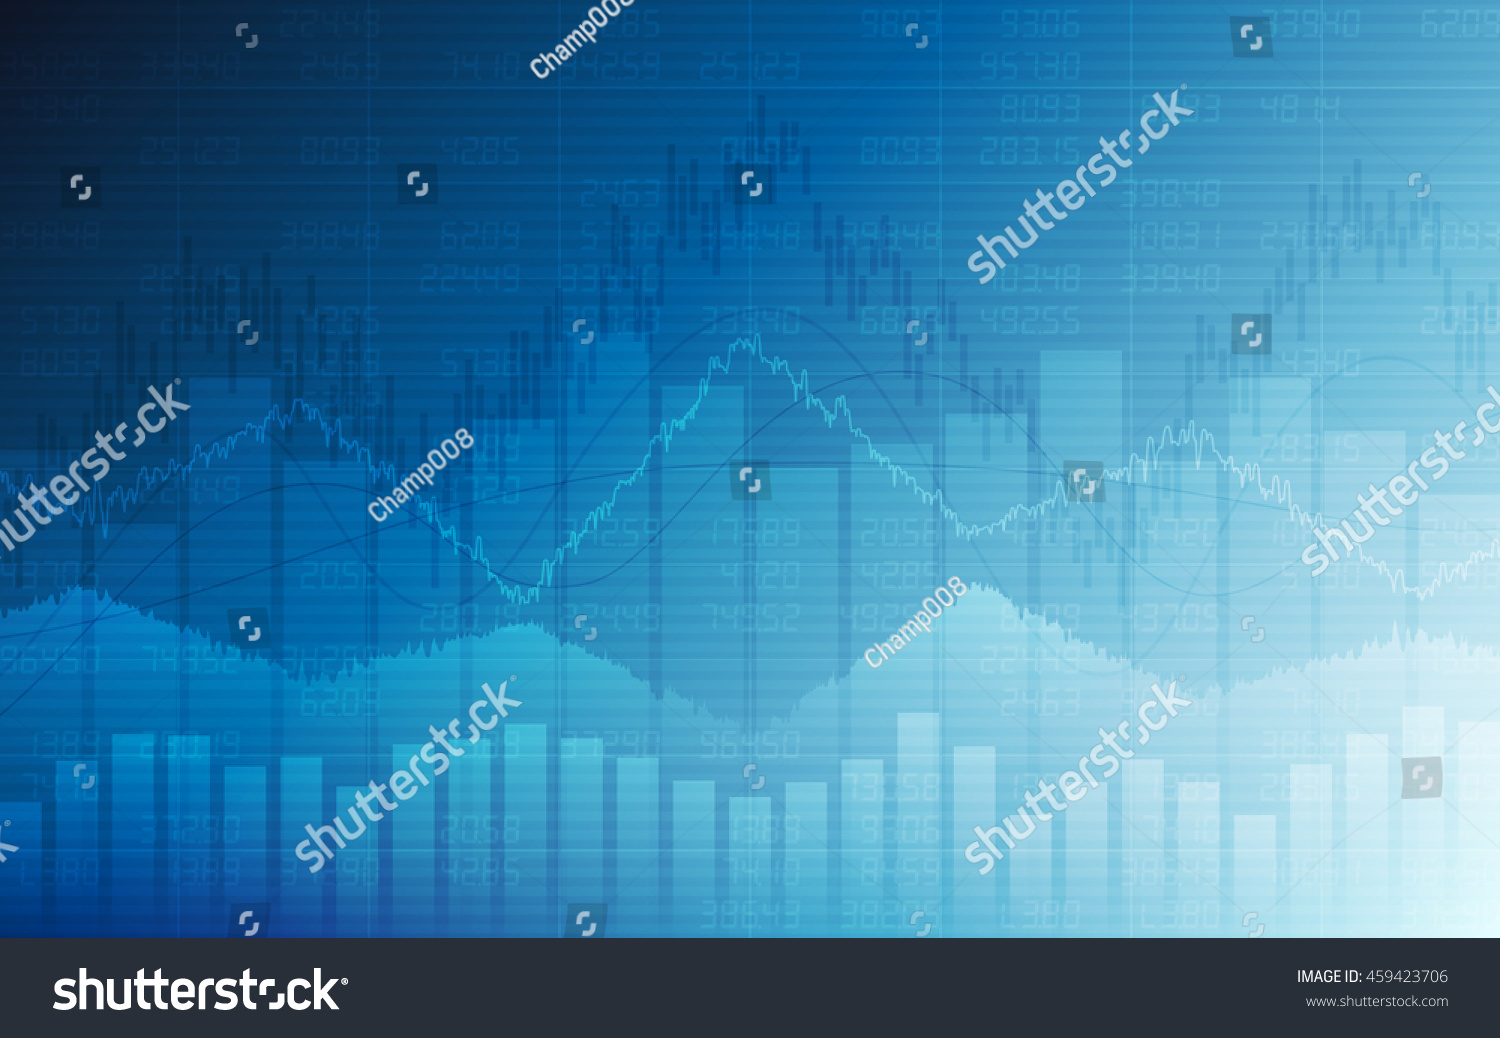 Business chart with uptrend line graph, bar chart and stock numbers in bull market on white and blue color background (vector) #459423706